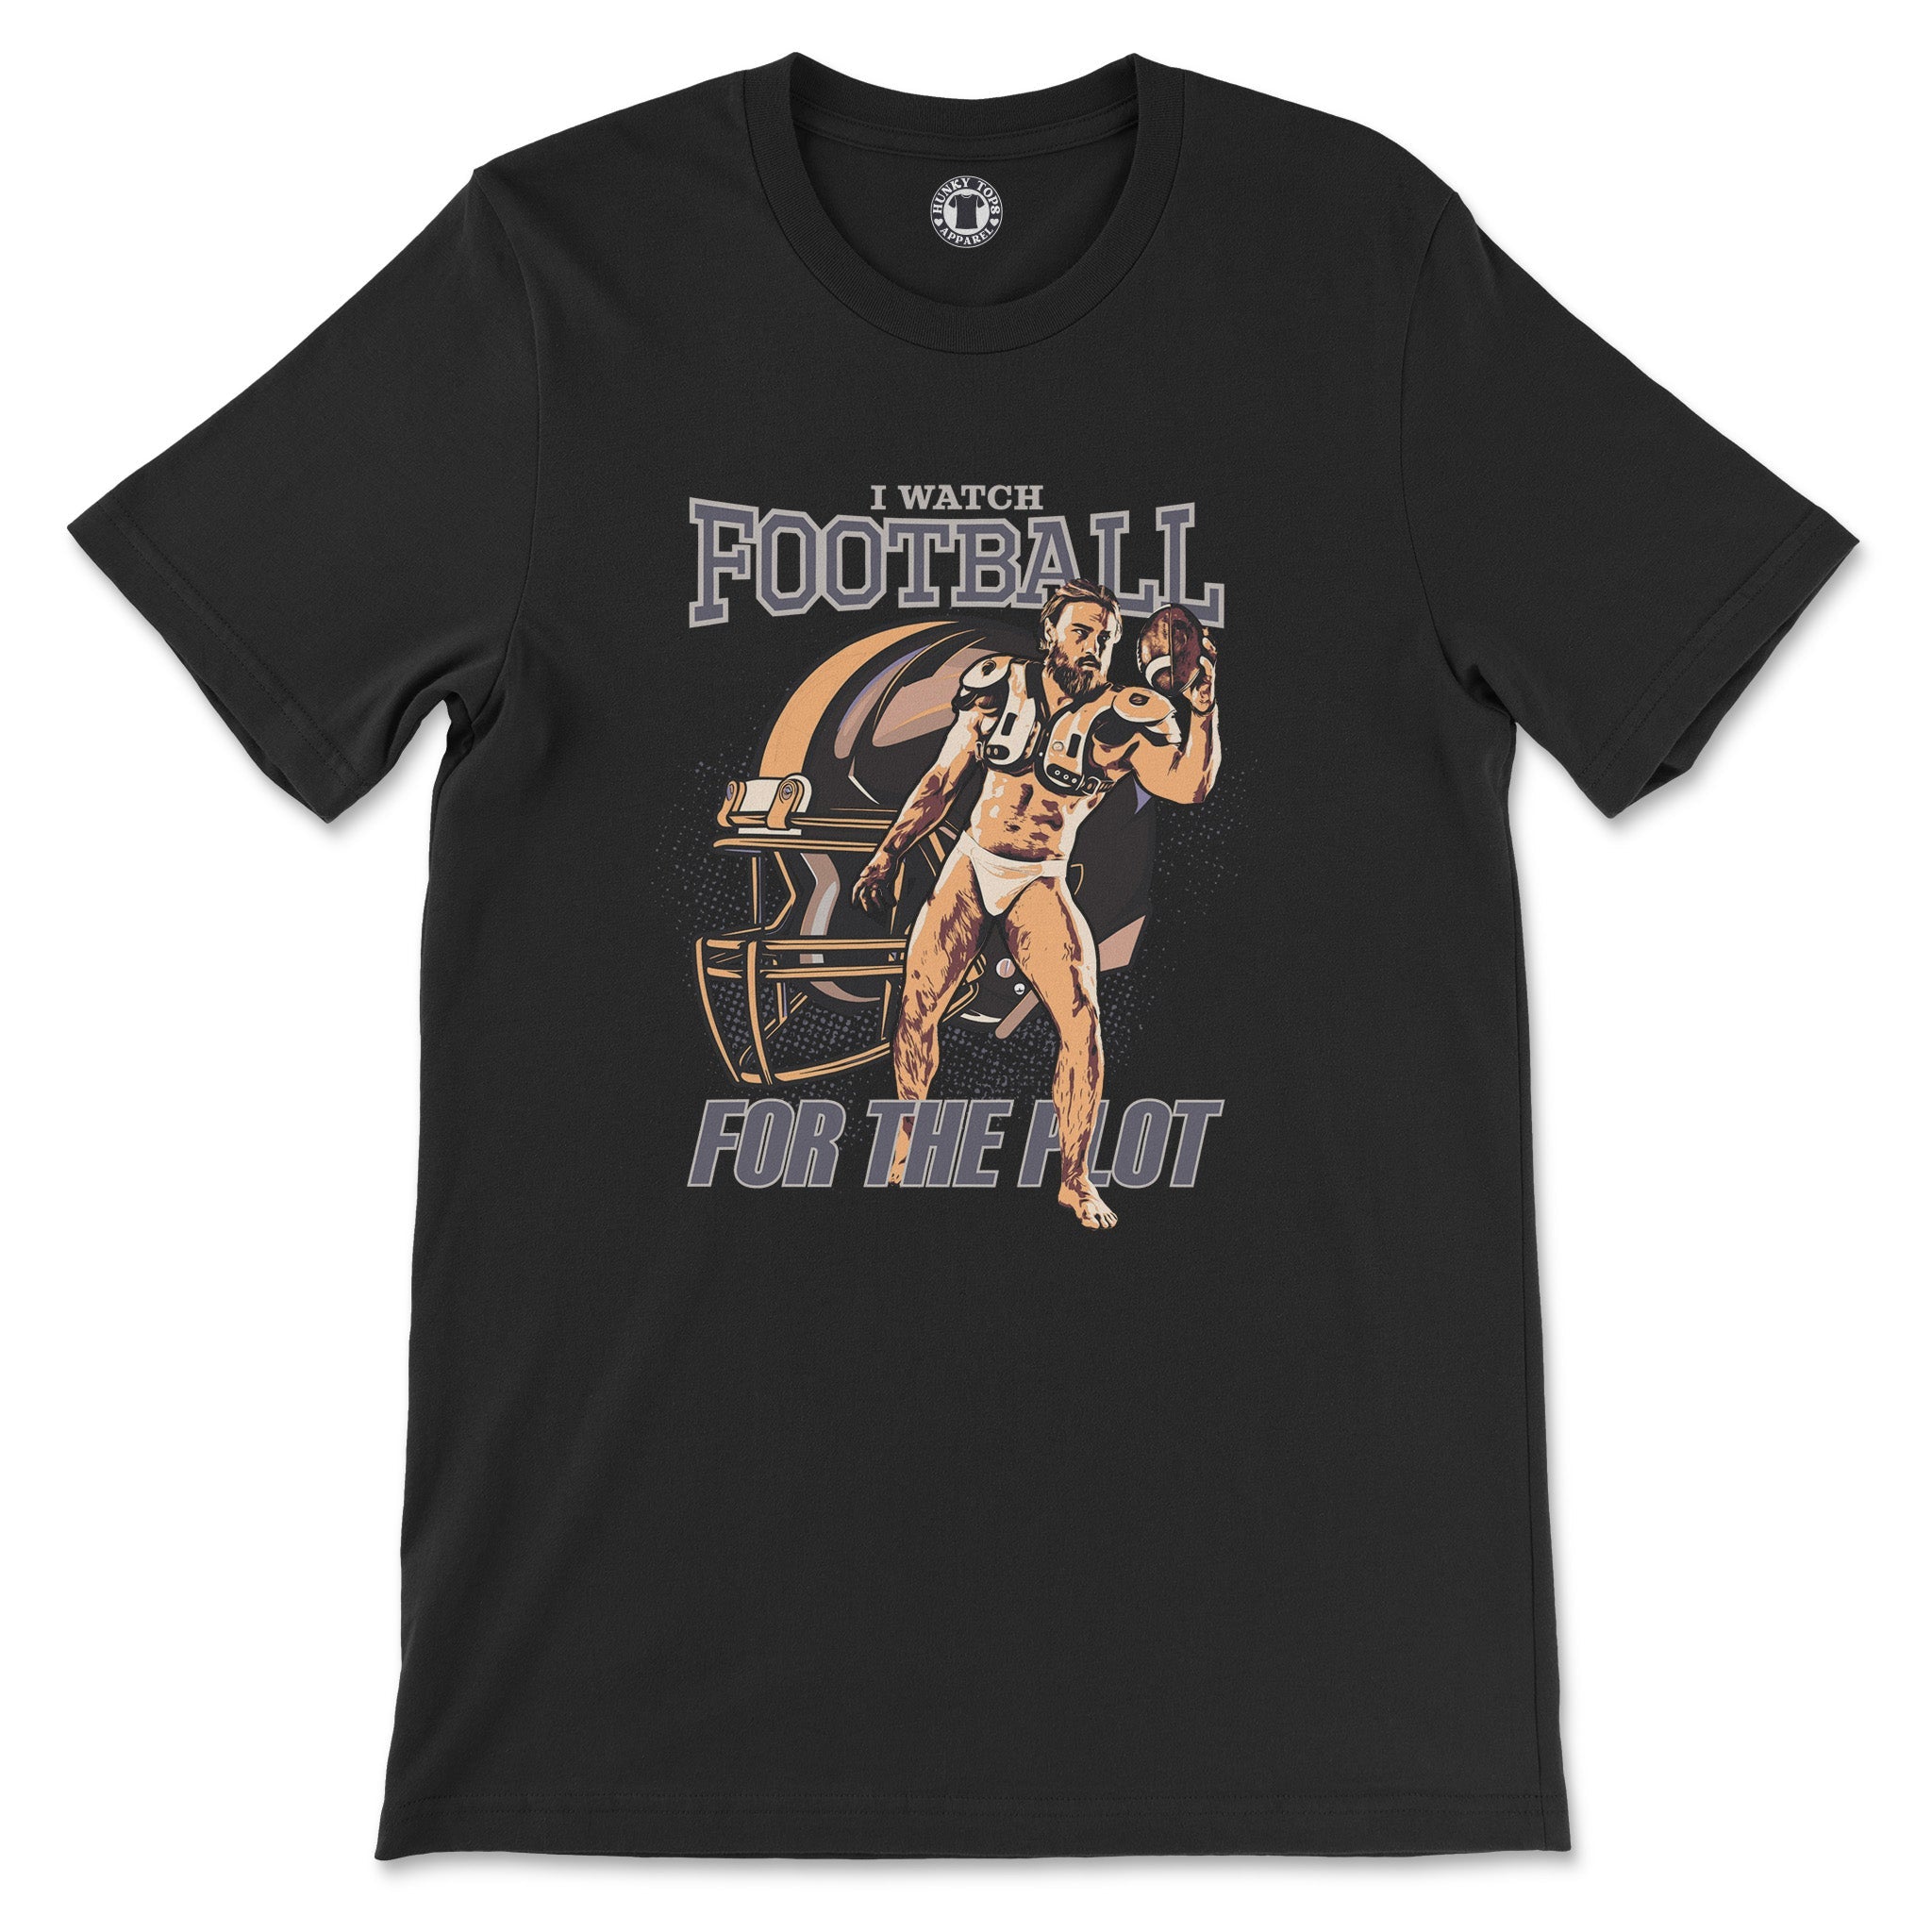 "I Watch Football For The Plot" Humor Sports Tee - Hunky Tops